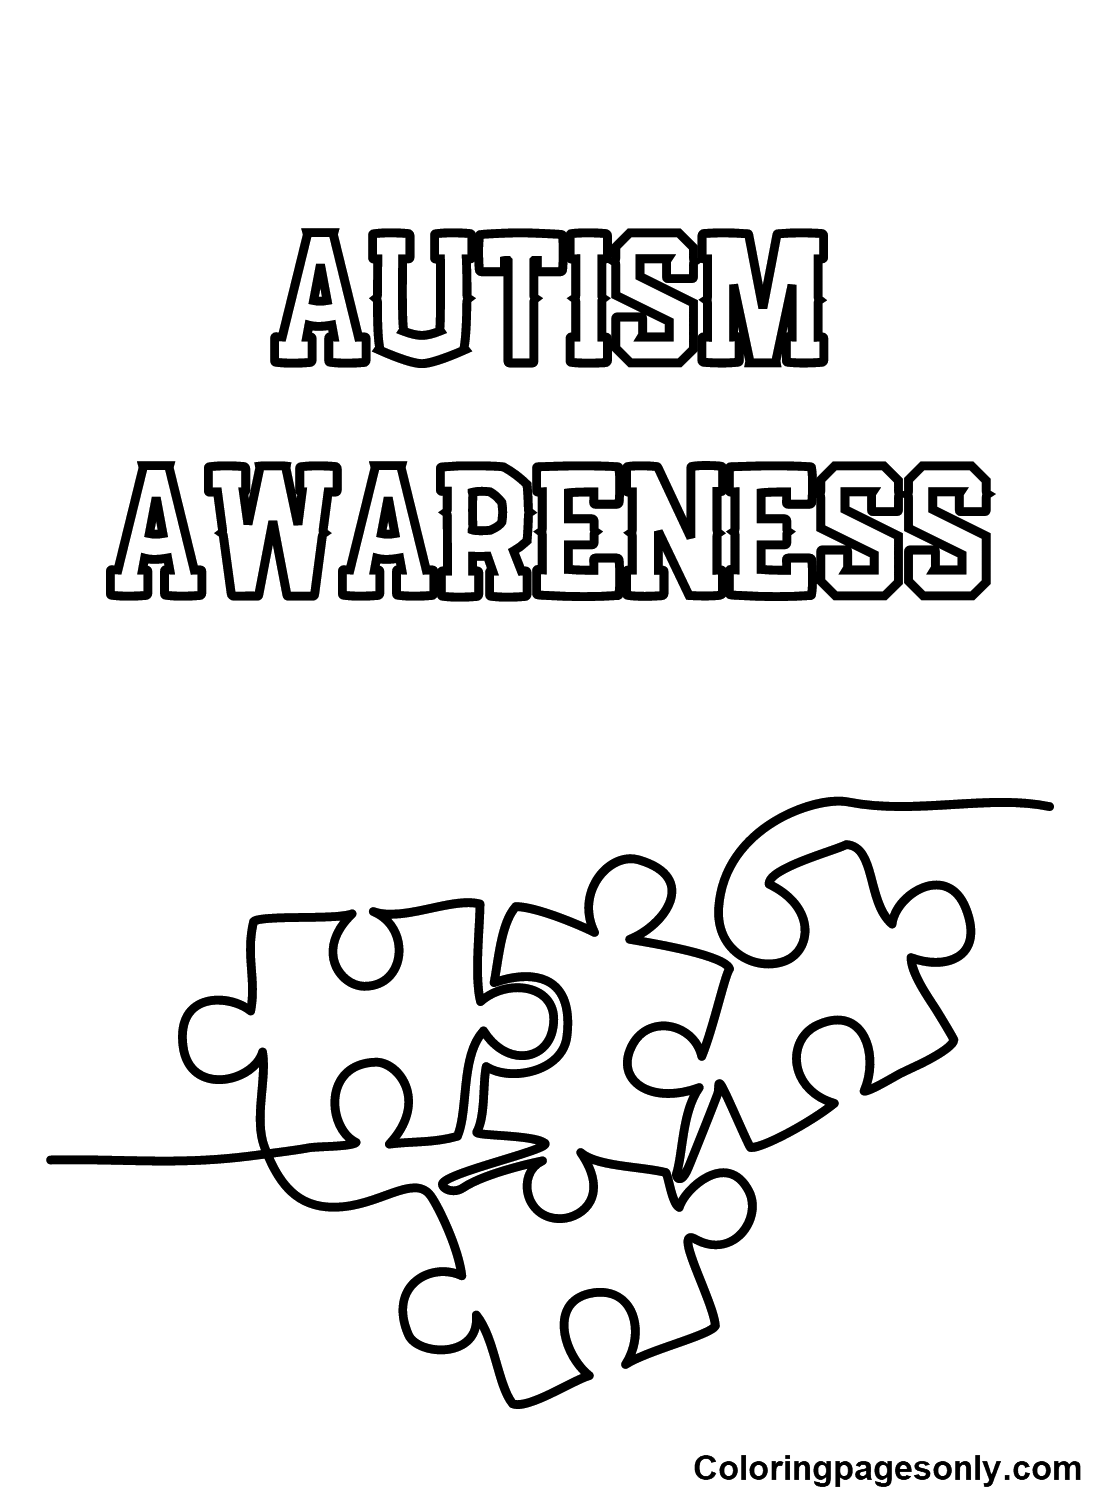 Image Autism Awareness Day Coloring Pages